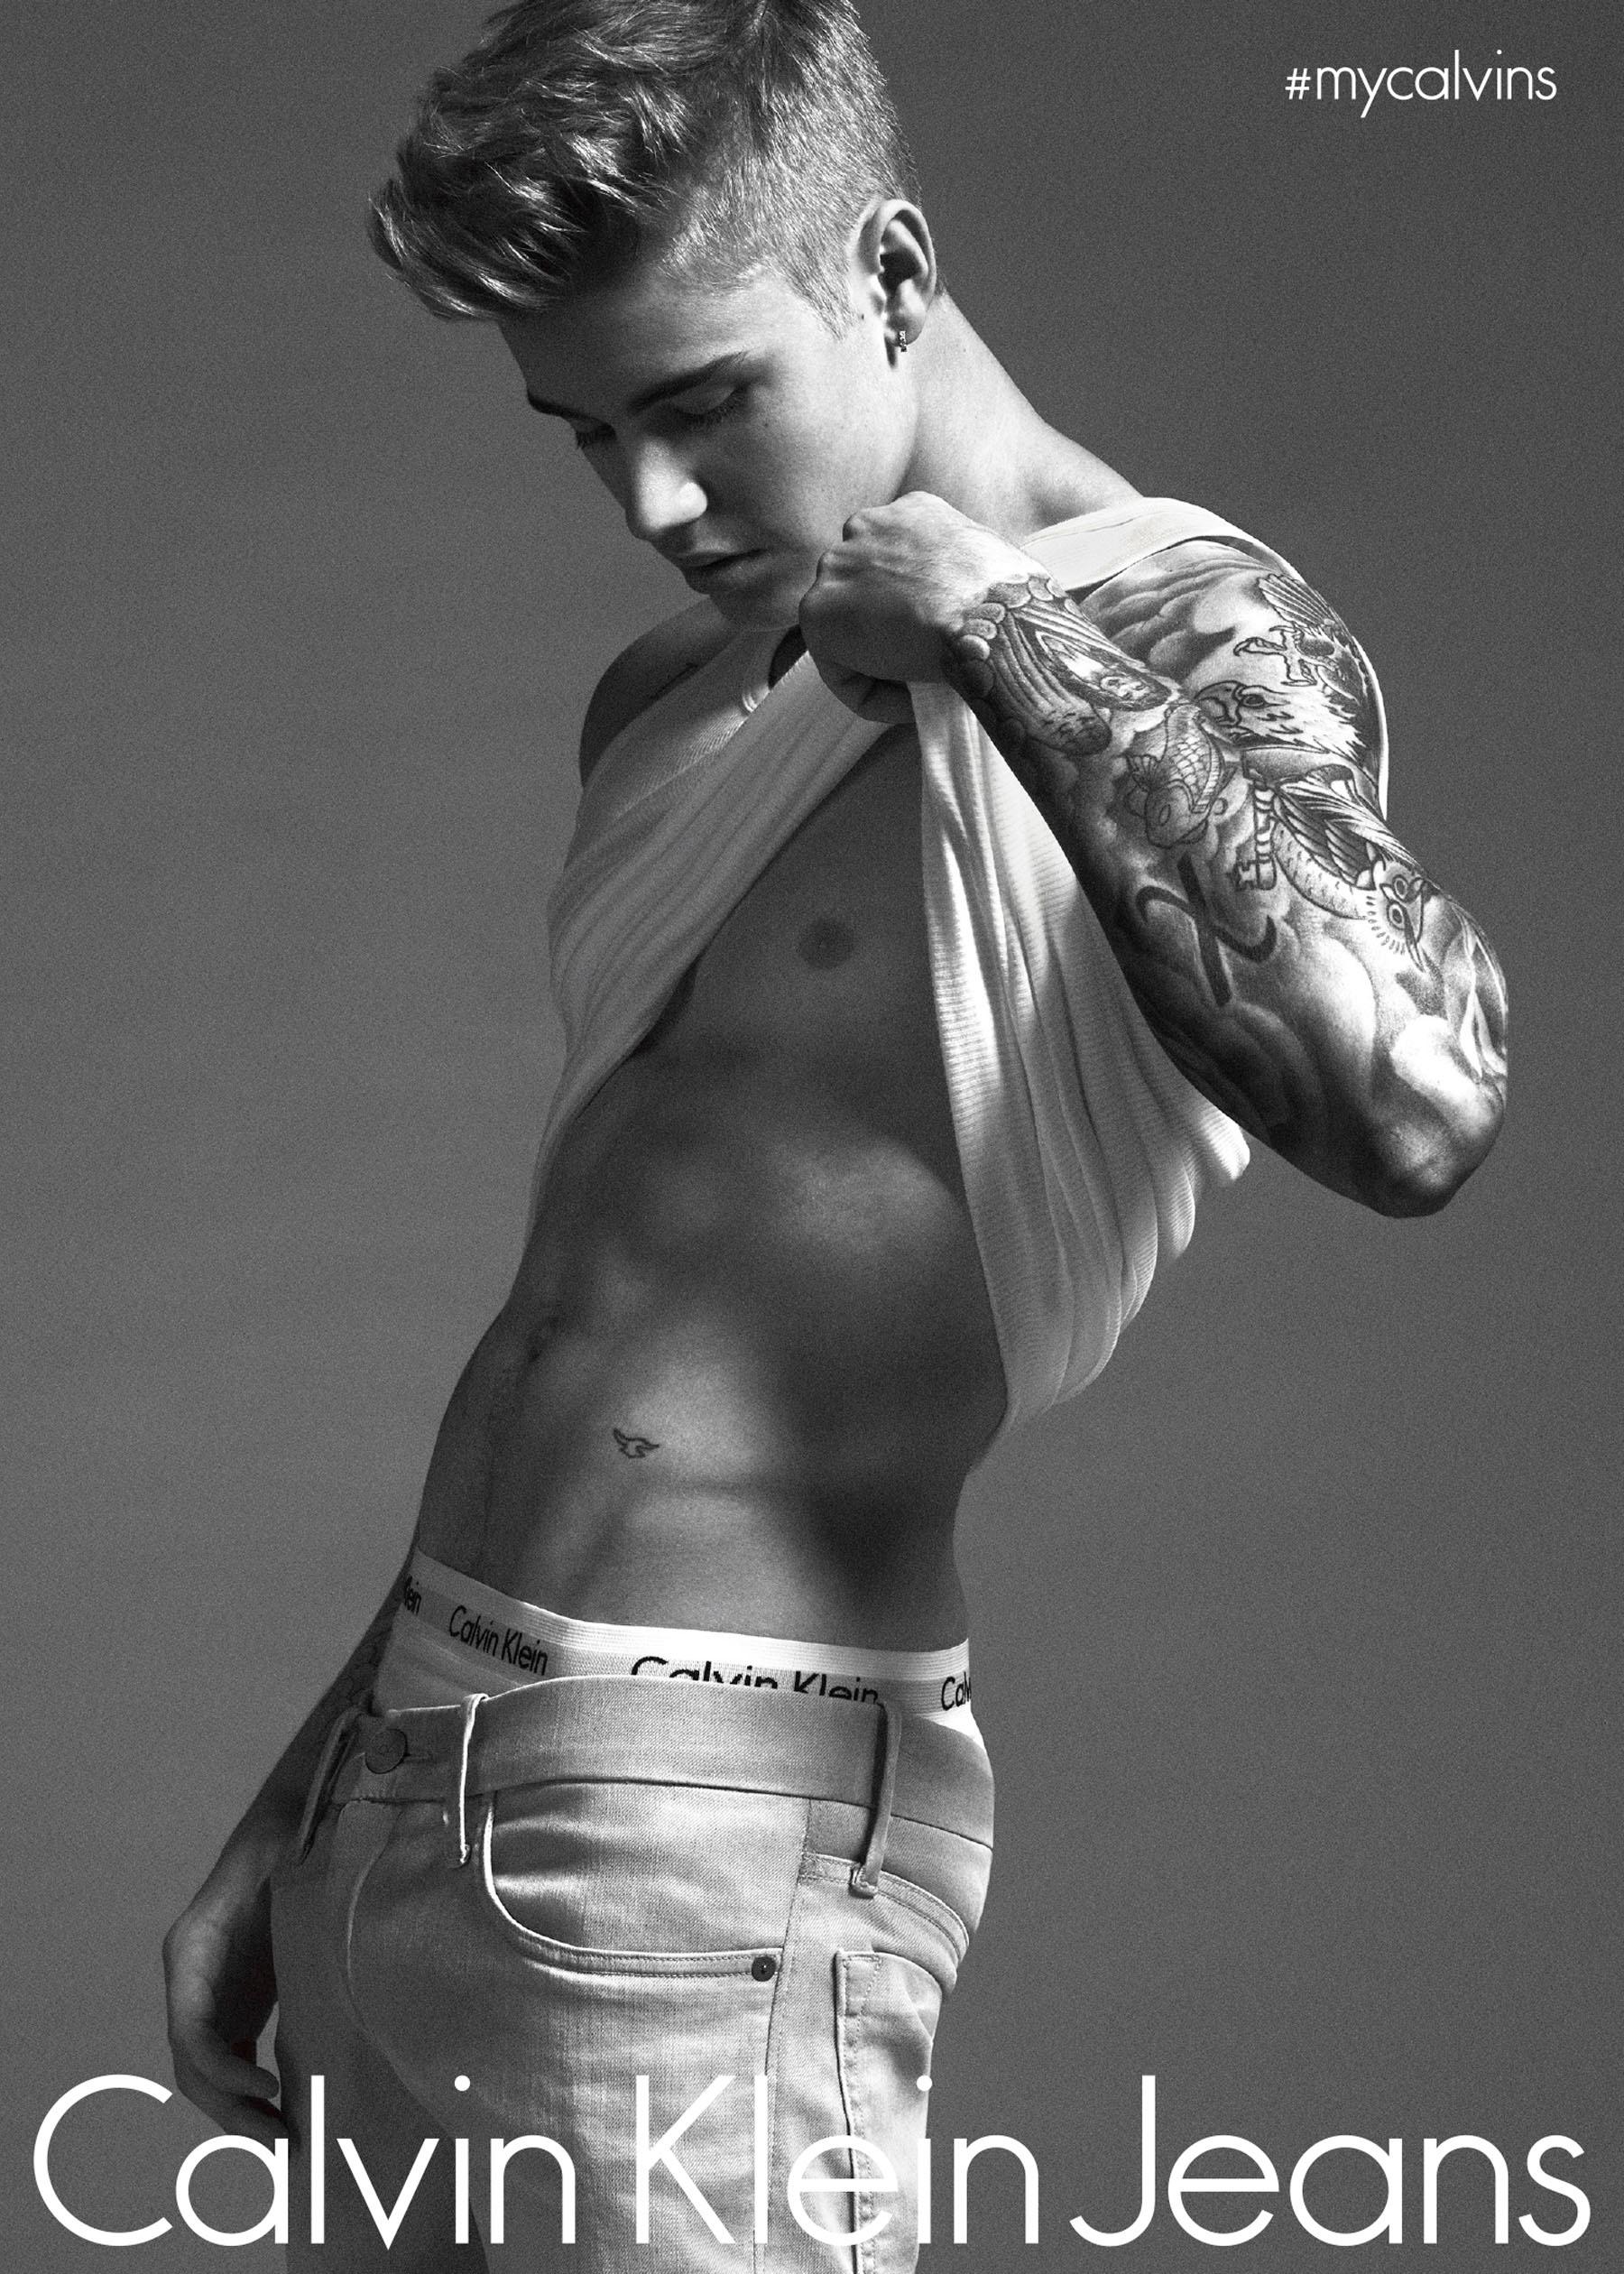 Justin Bieber's Body Photoshopped For Calvin Klein Ad? Photos And Video  Suggest Singer's Body Bulked Up Digitally